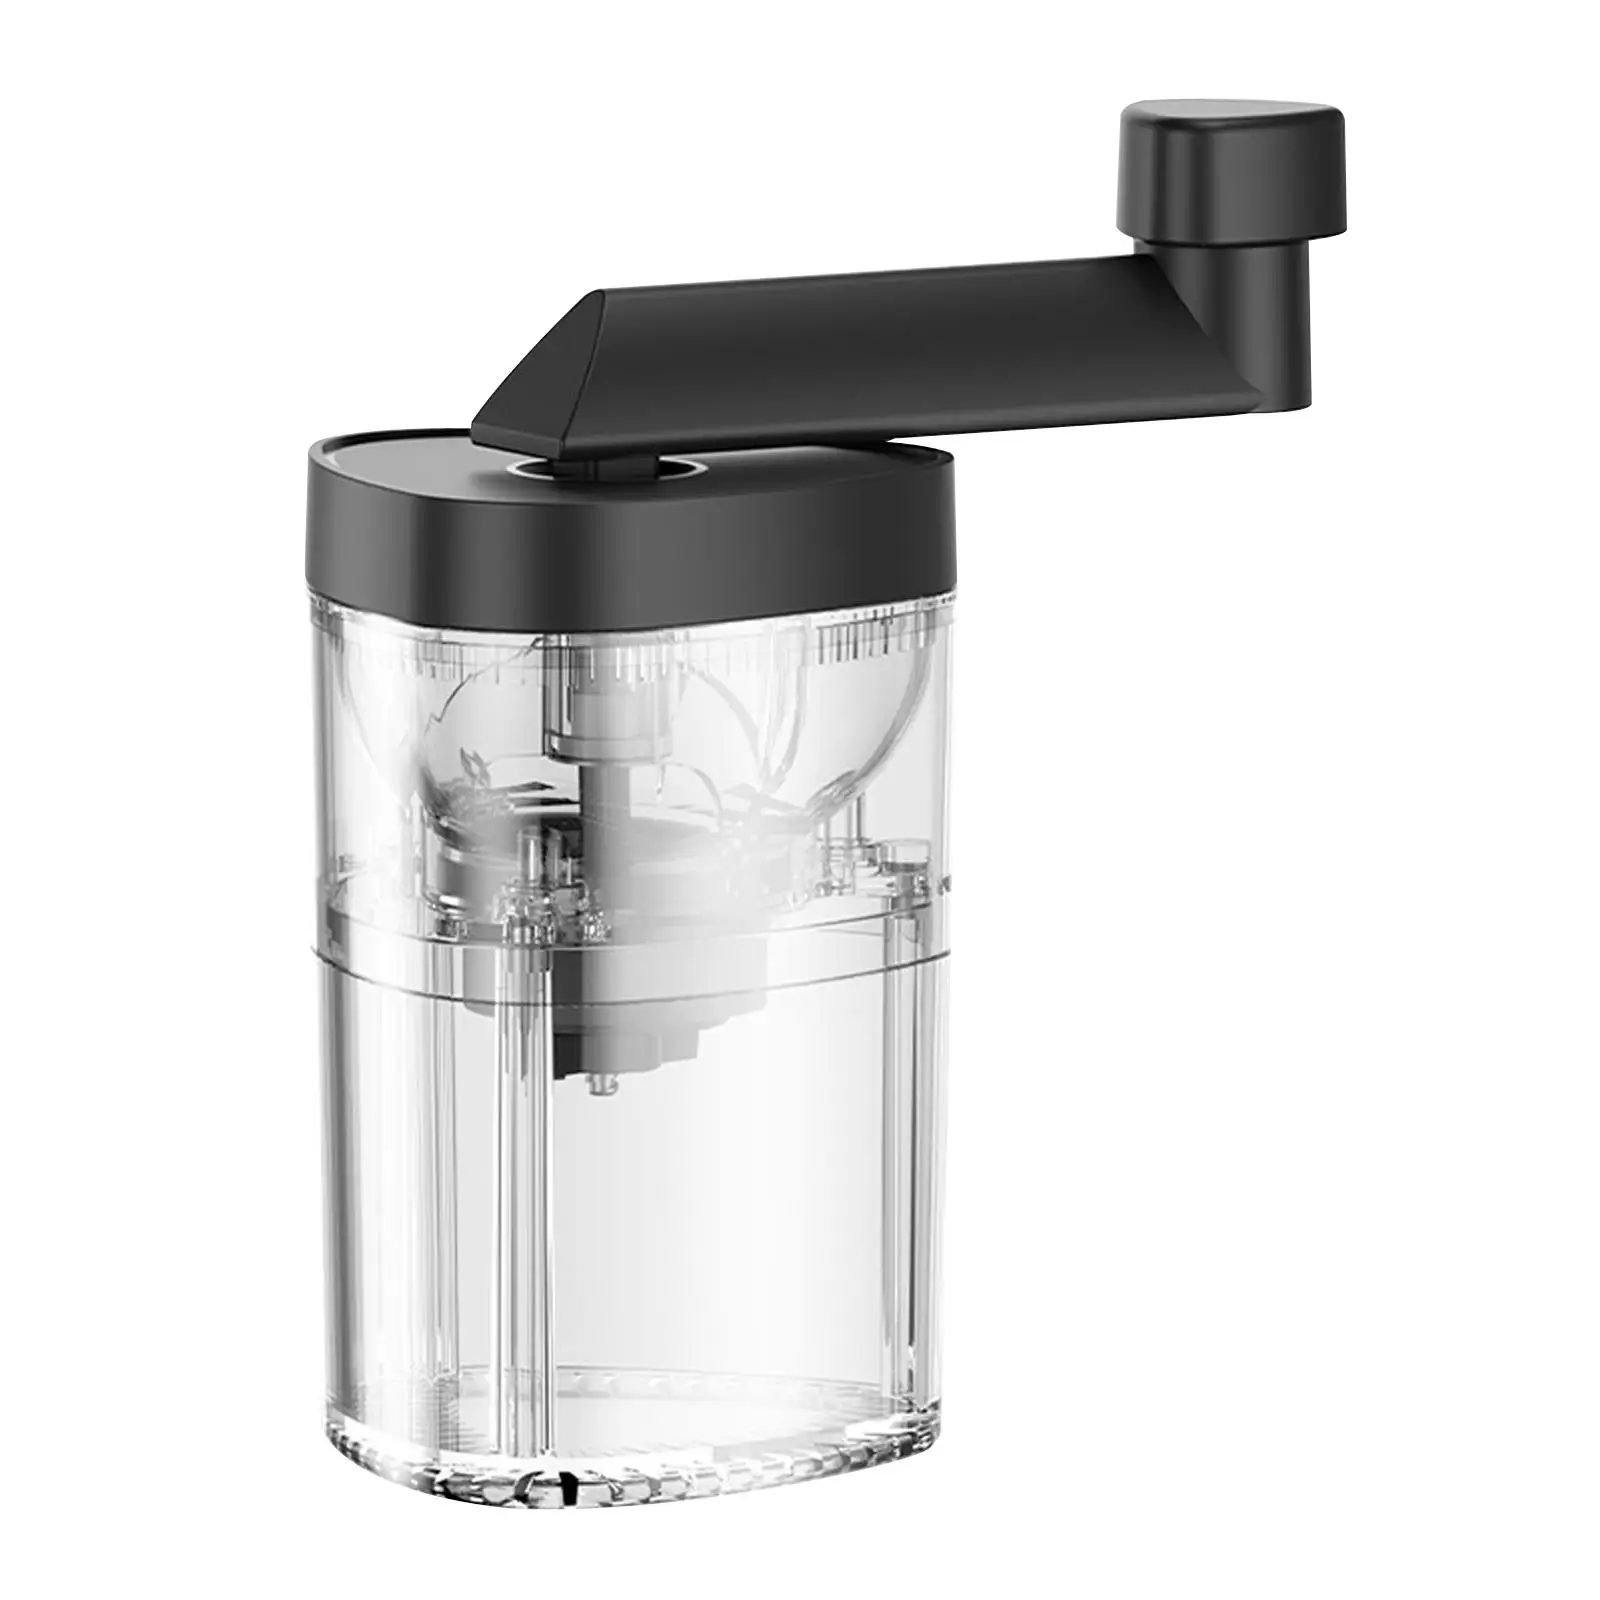 Manual Adjustable Coffee Grinder Clear Tank Easy to Cleaning Espresso Grinder